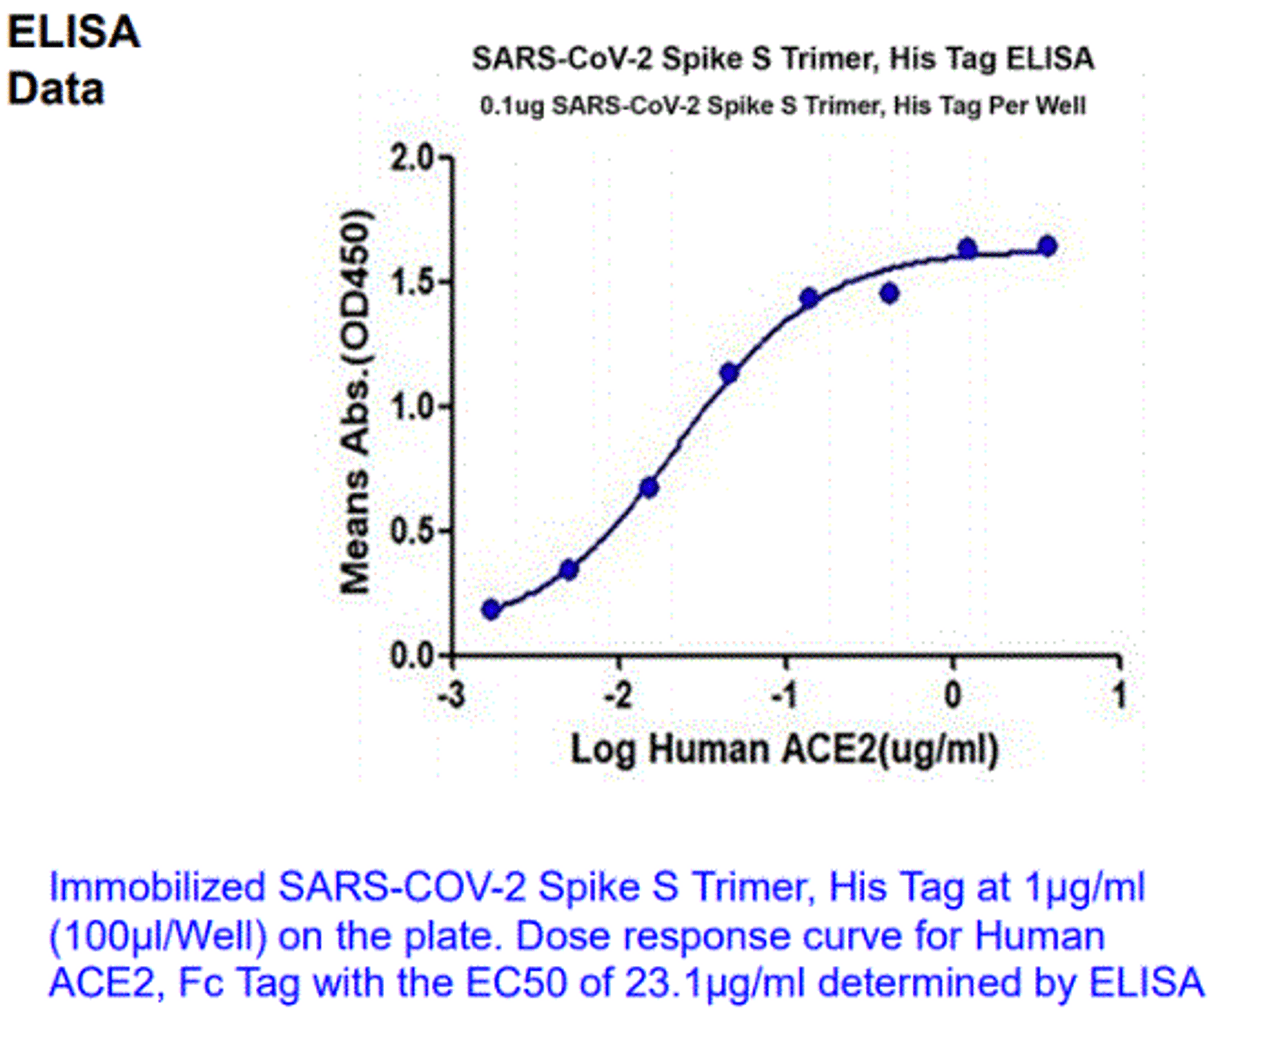 Immobilized SARS-CoV-2 (COVID-19) Spike S Trimer, His Tag at 1 ug/ml (100ug/Well) on the plate. Dose response curve for Human ACE2, Fc Tag with the EC50 of 23.1 ug/ml determined by ELISA.